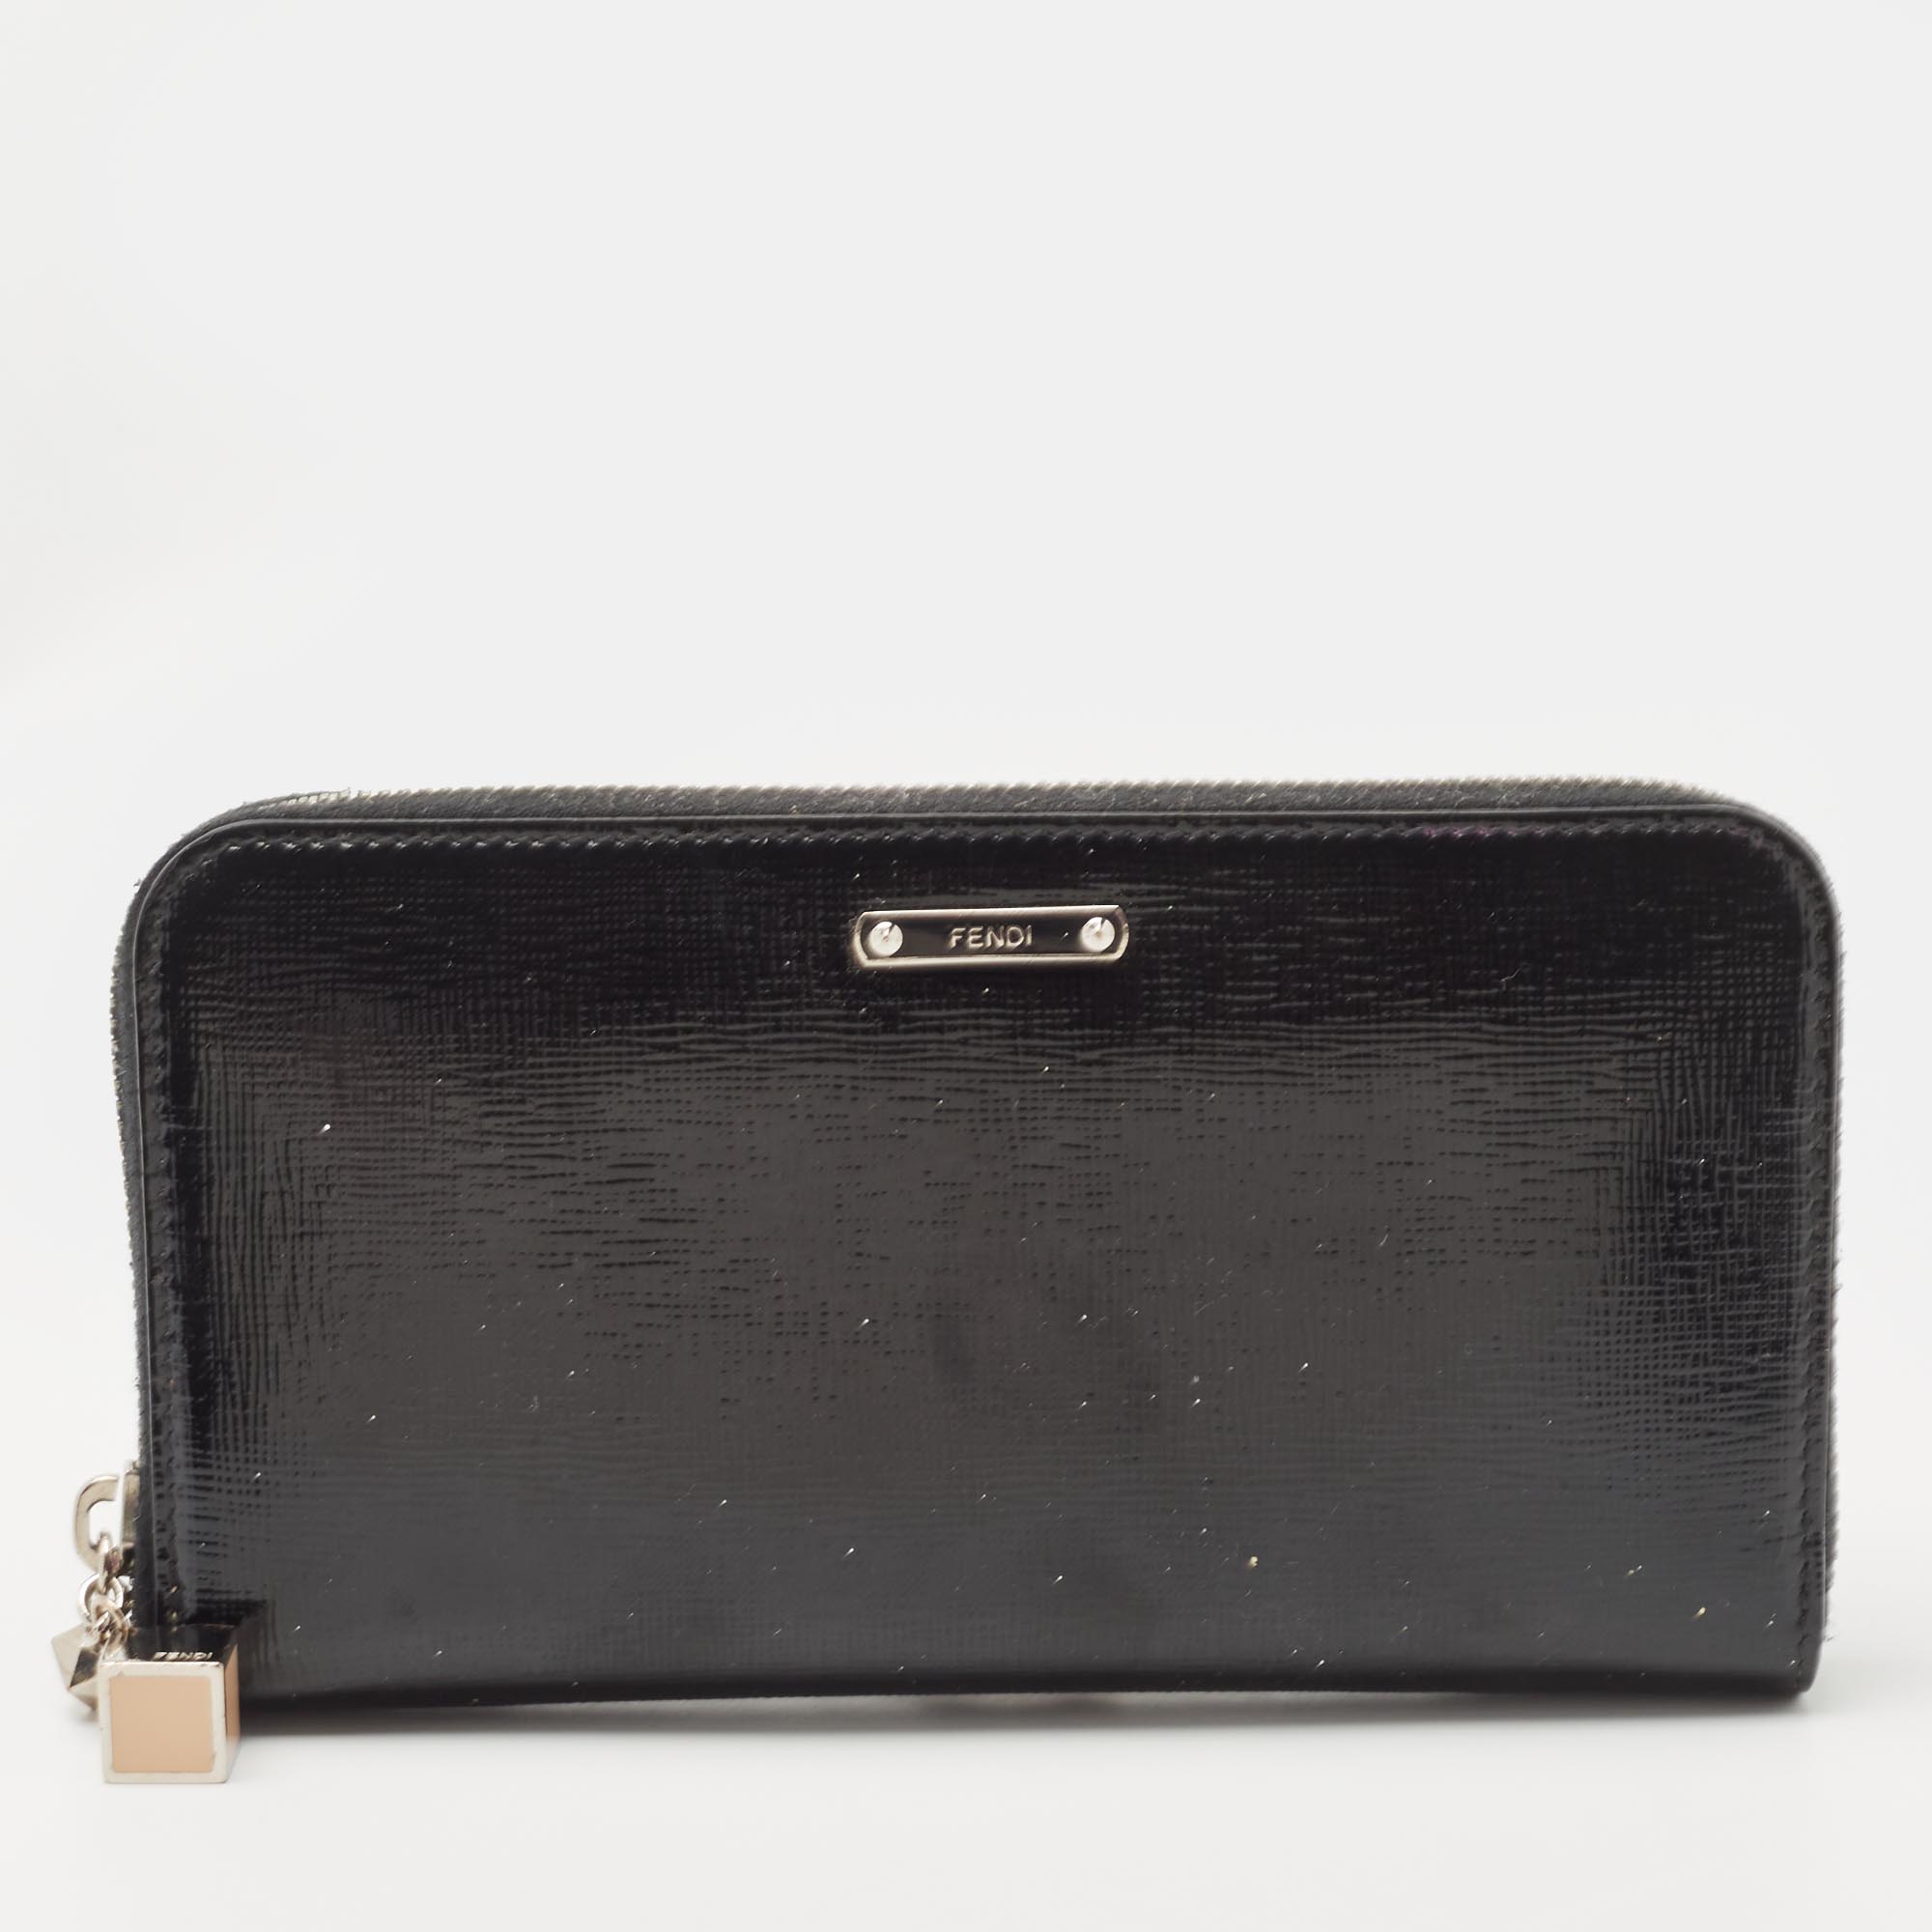 Pre-owned Fendi Black Patent Leather Zip Around Wallet